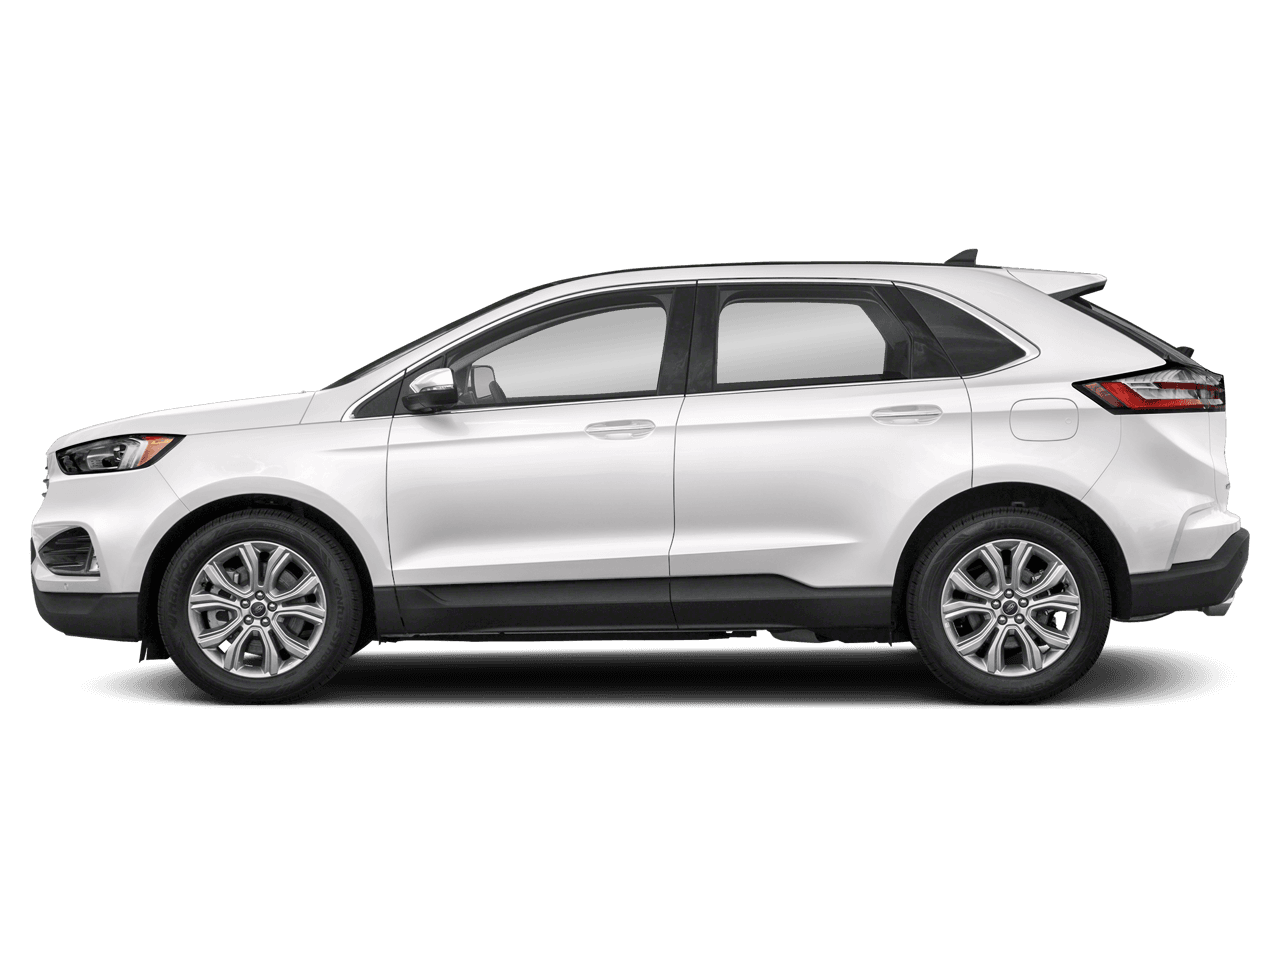 2022 Ford Edge Photo in Bethesda, MD 20814